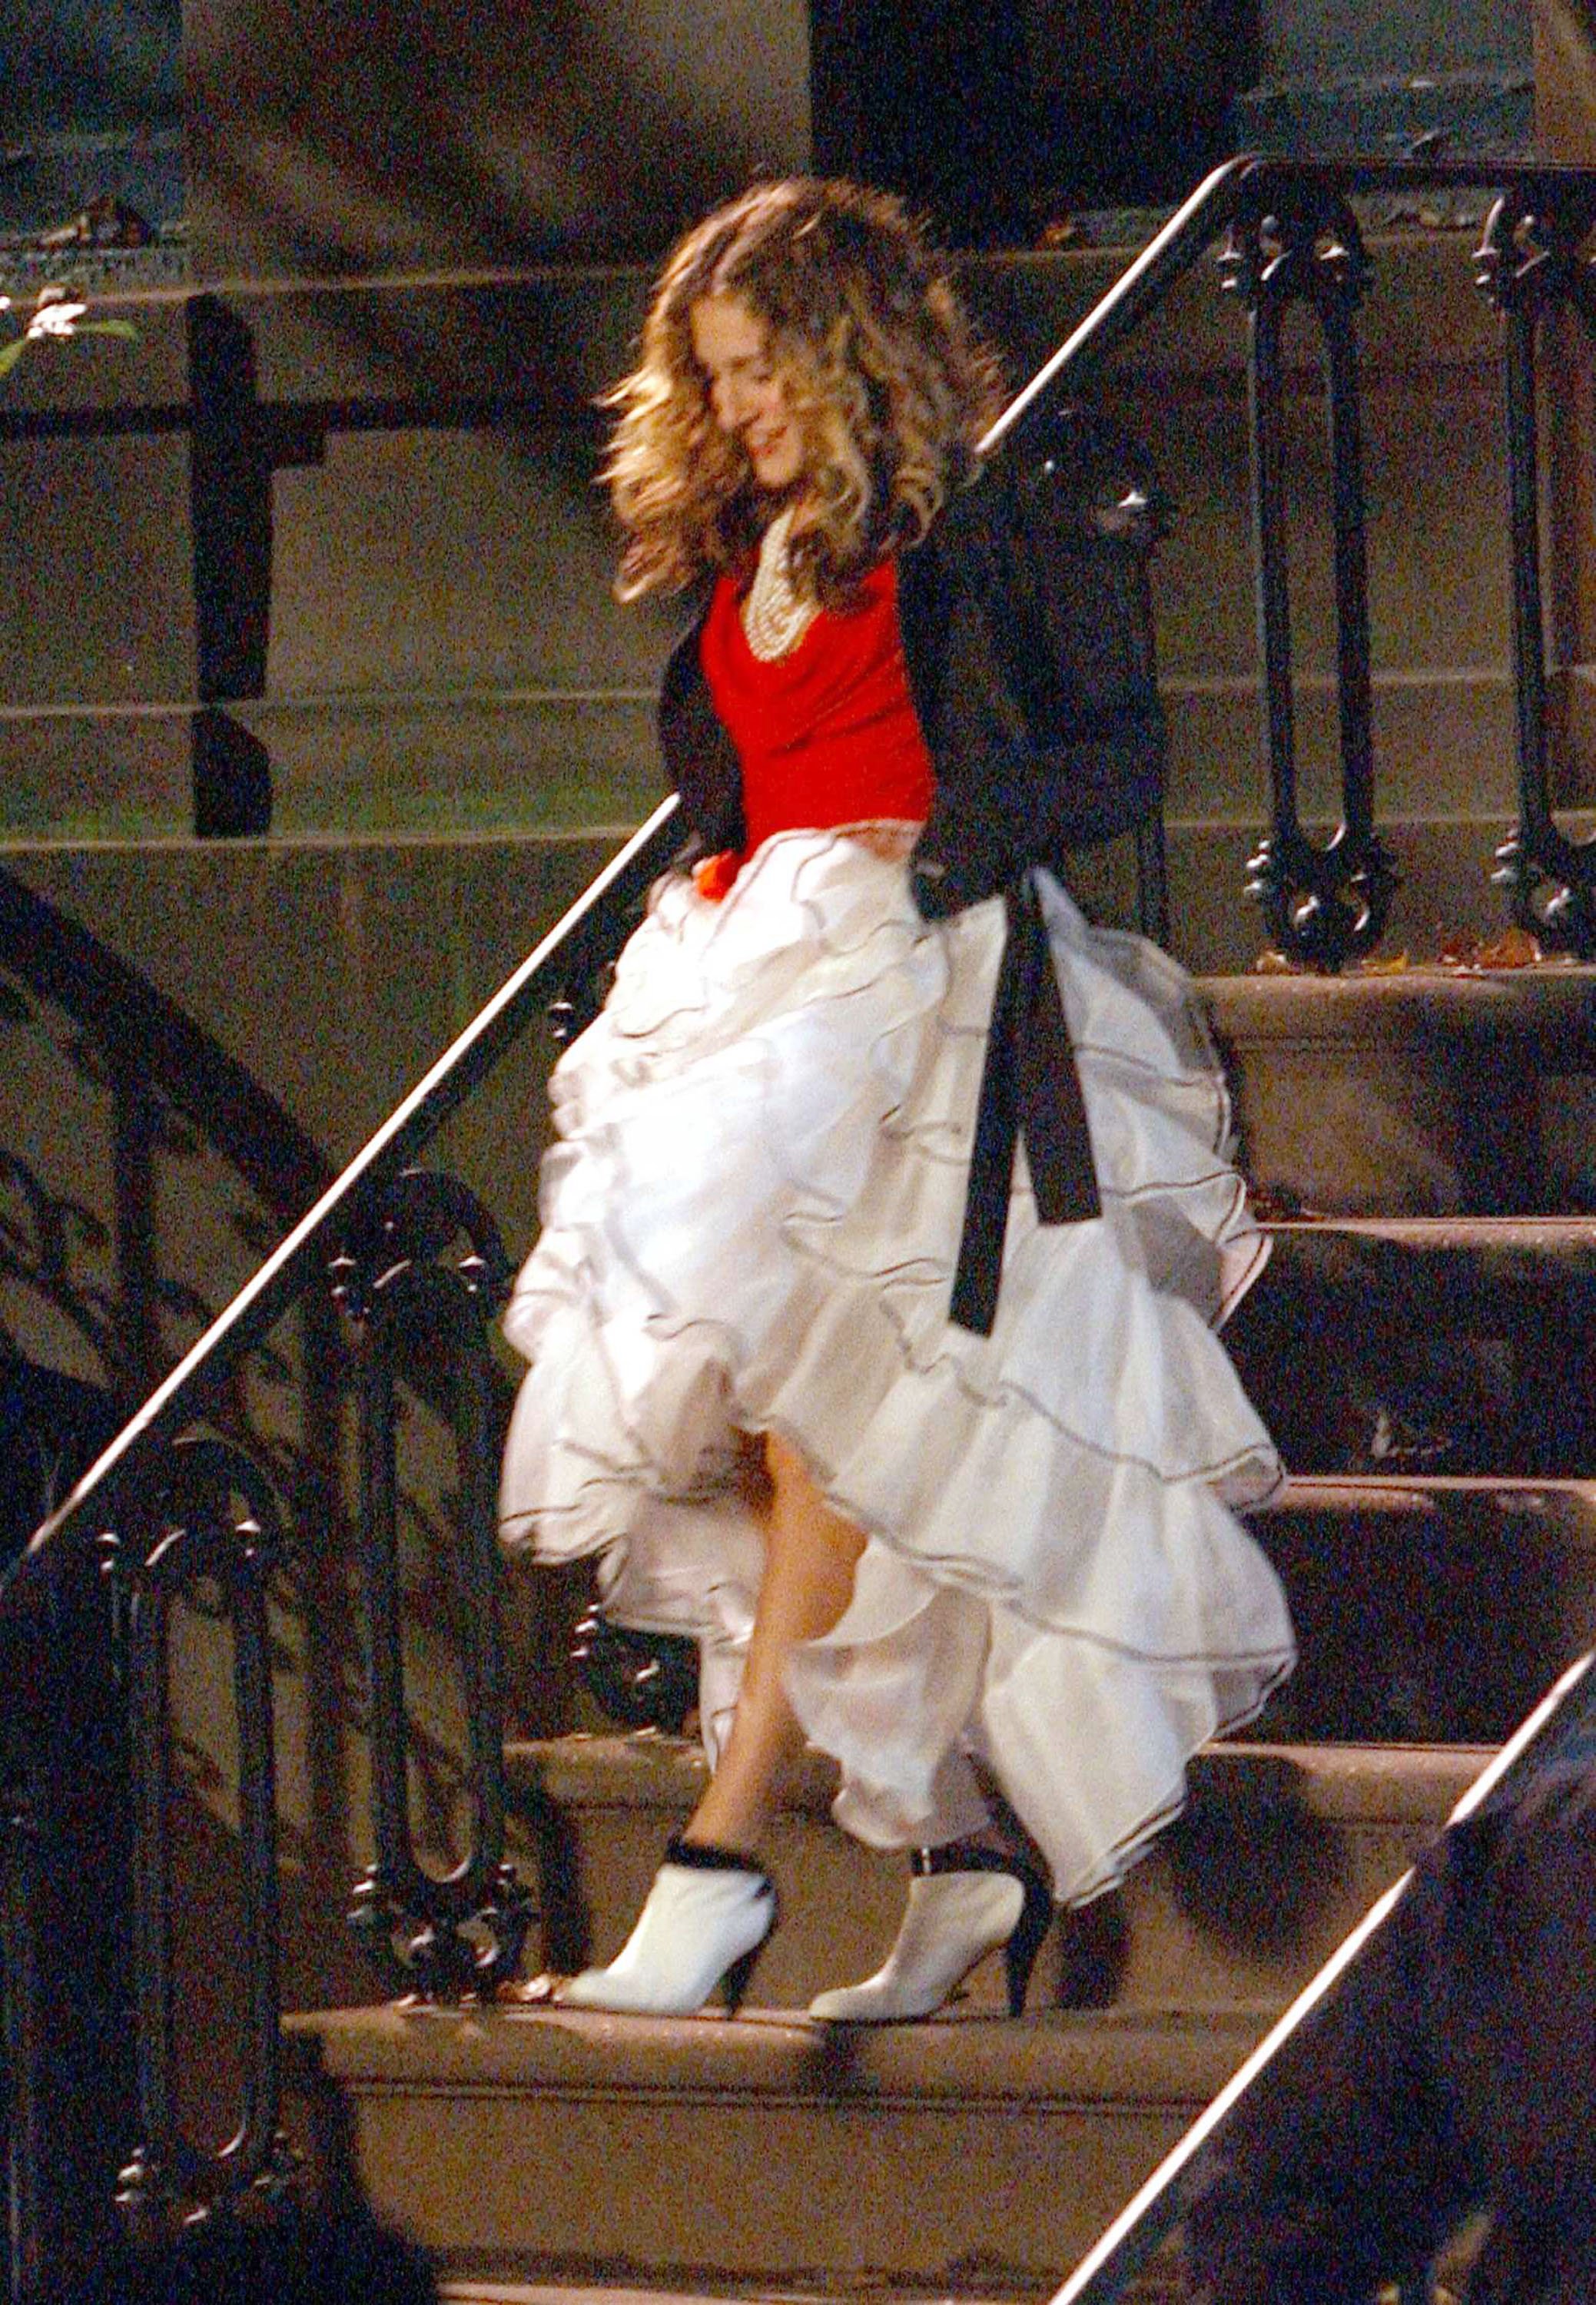 Sex and the City': Did Carrie Bradshaw Ever Wear Sneakers?